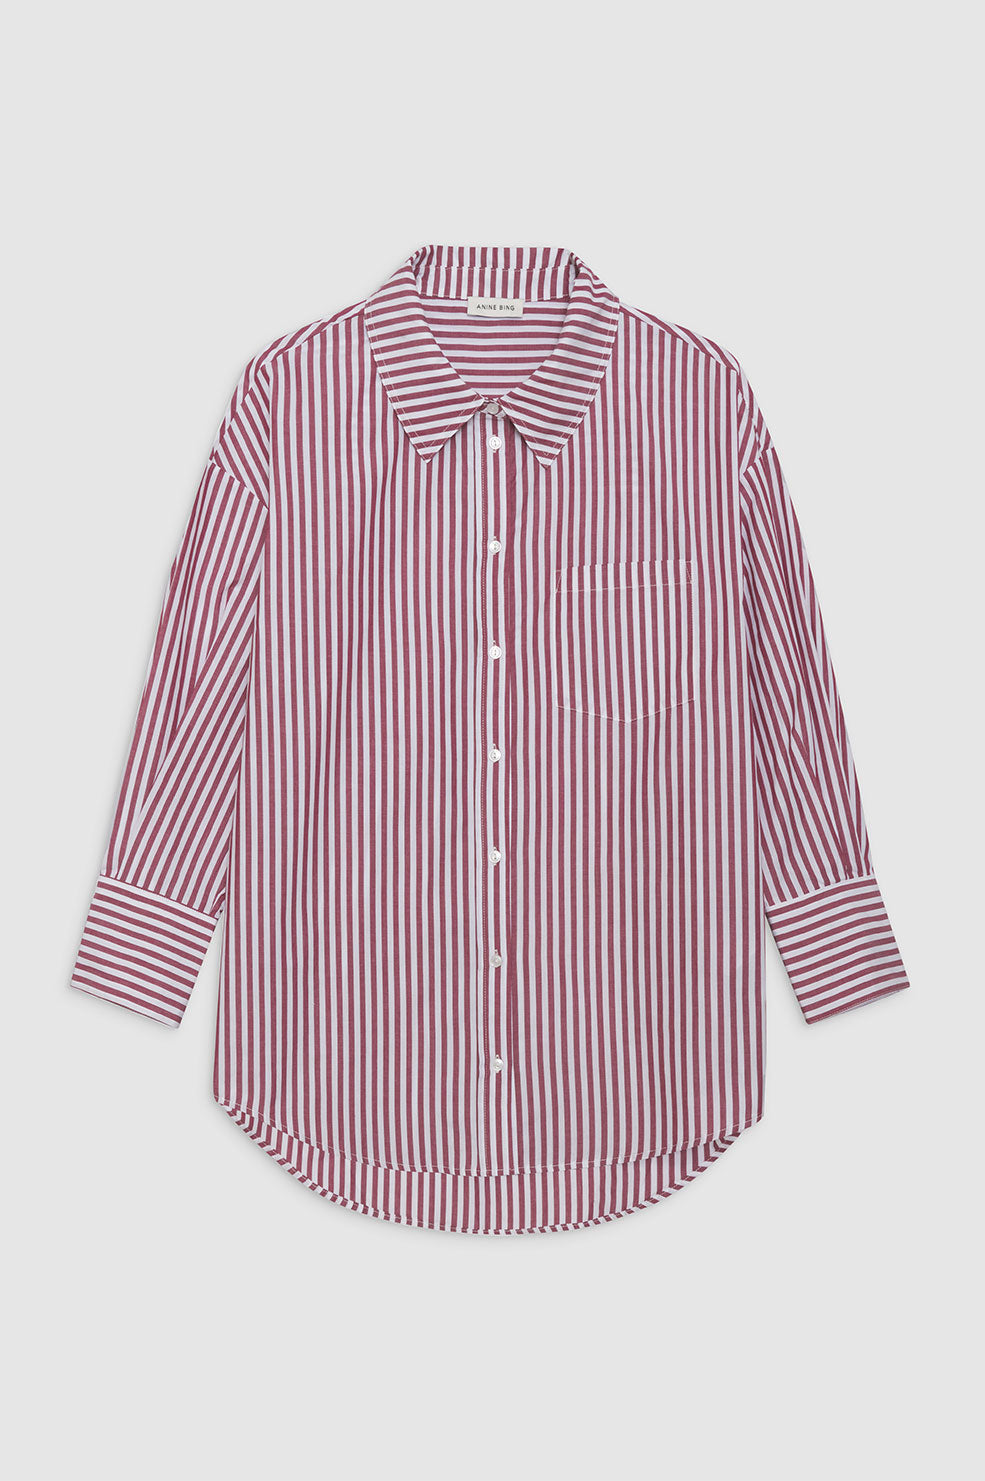 ANINE BING Mika Shirt - Red And White Stripe - Front View